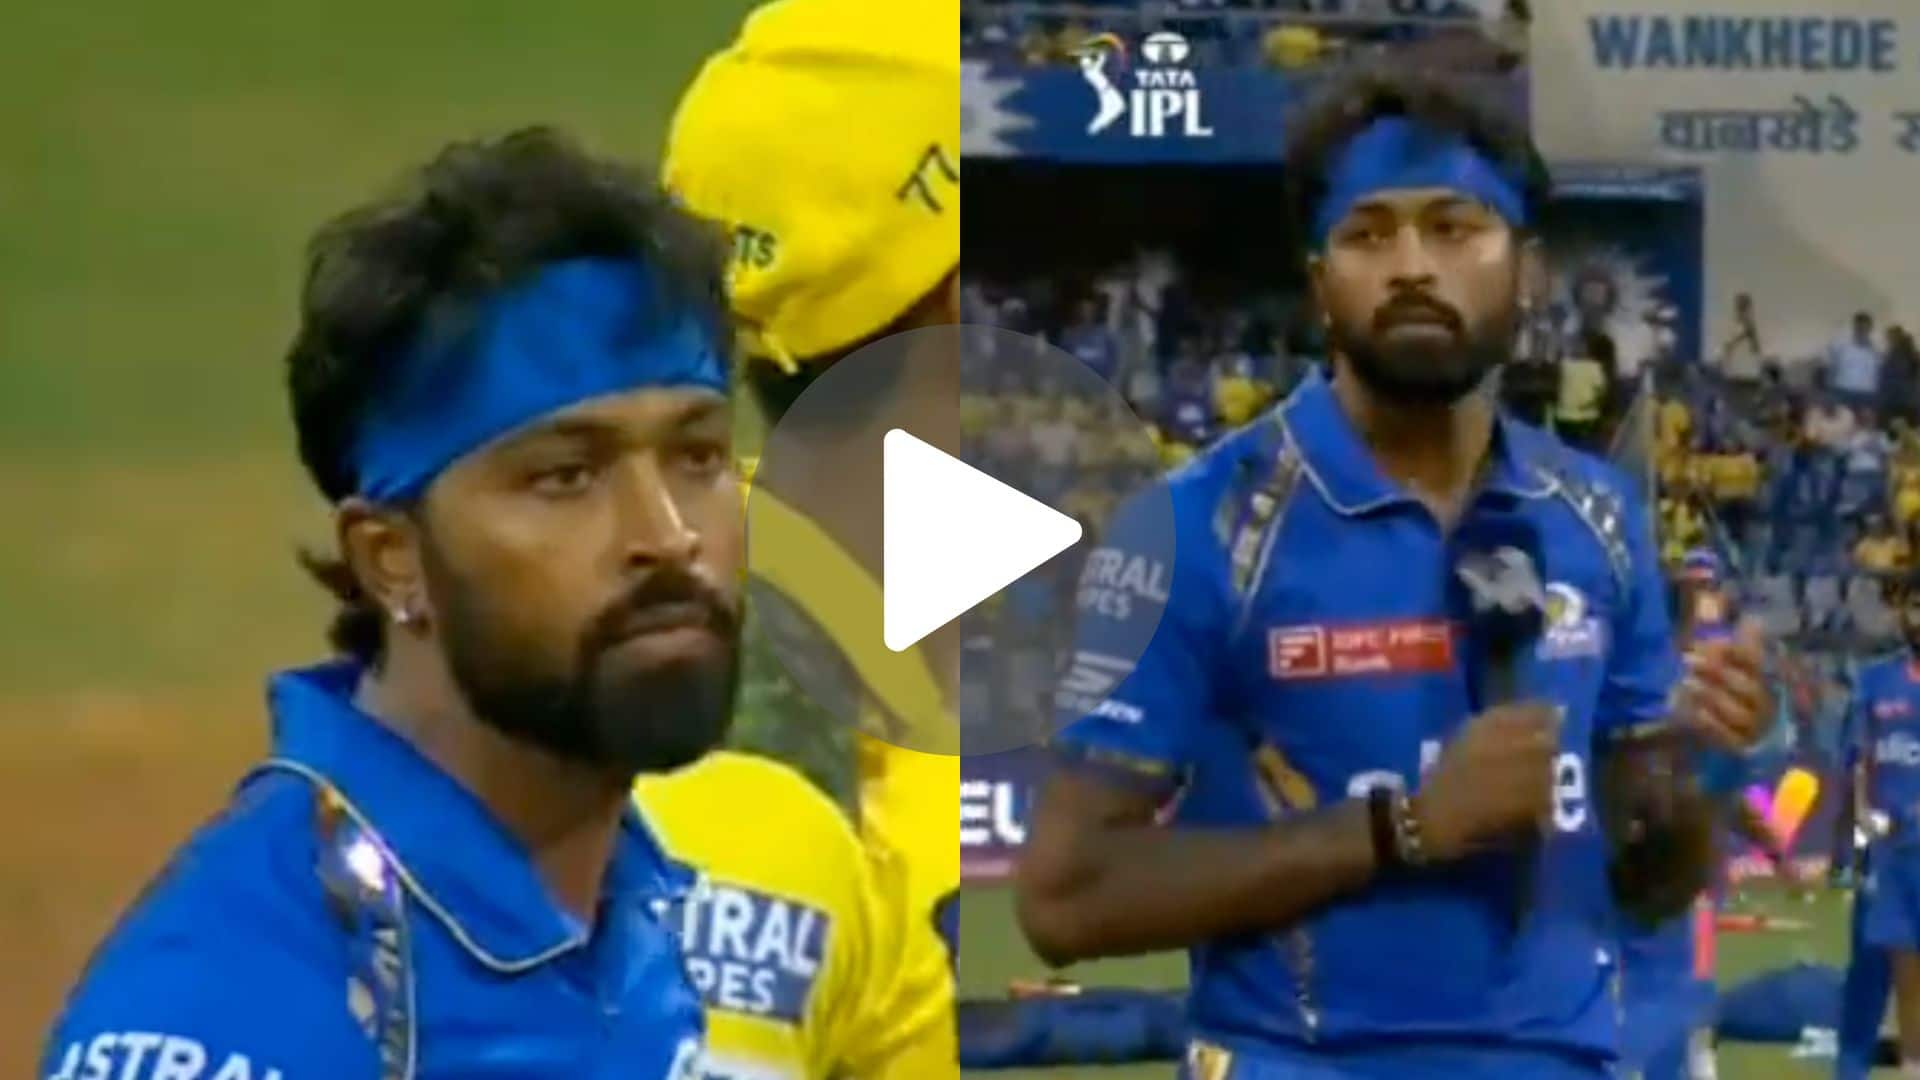 [Watch] 'Rohit..Rohit..,' Hardik Pandya Booed As He Comes Out For Toss In MI vs CSK